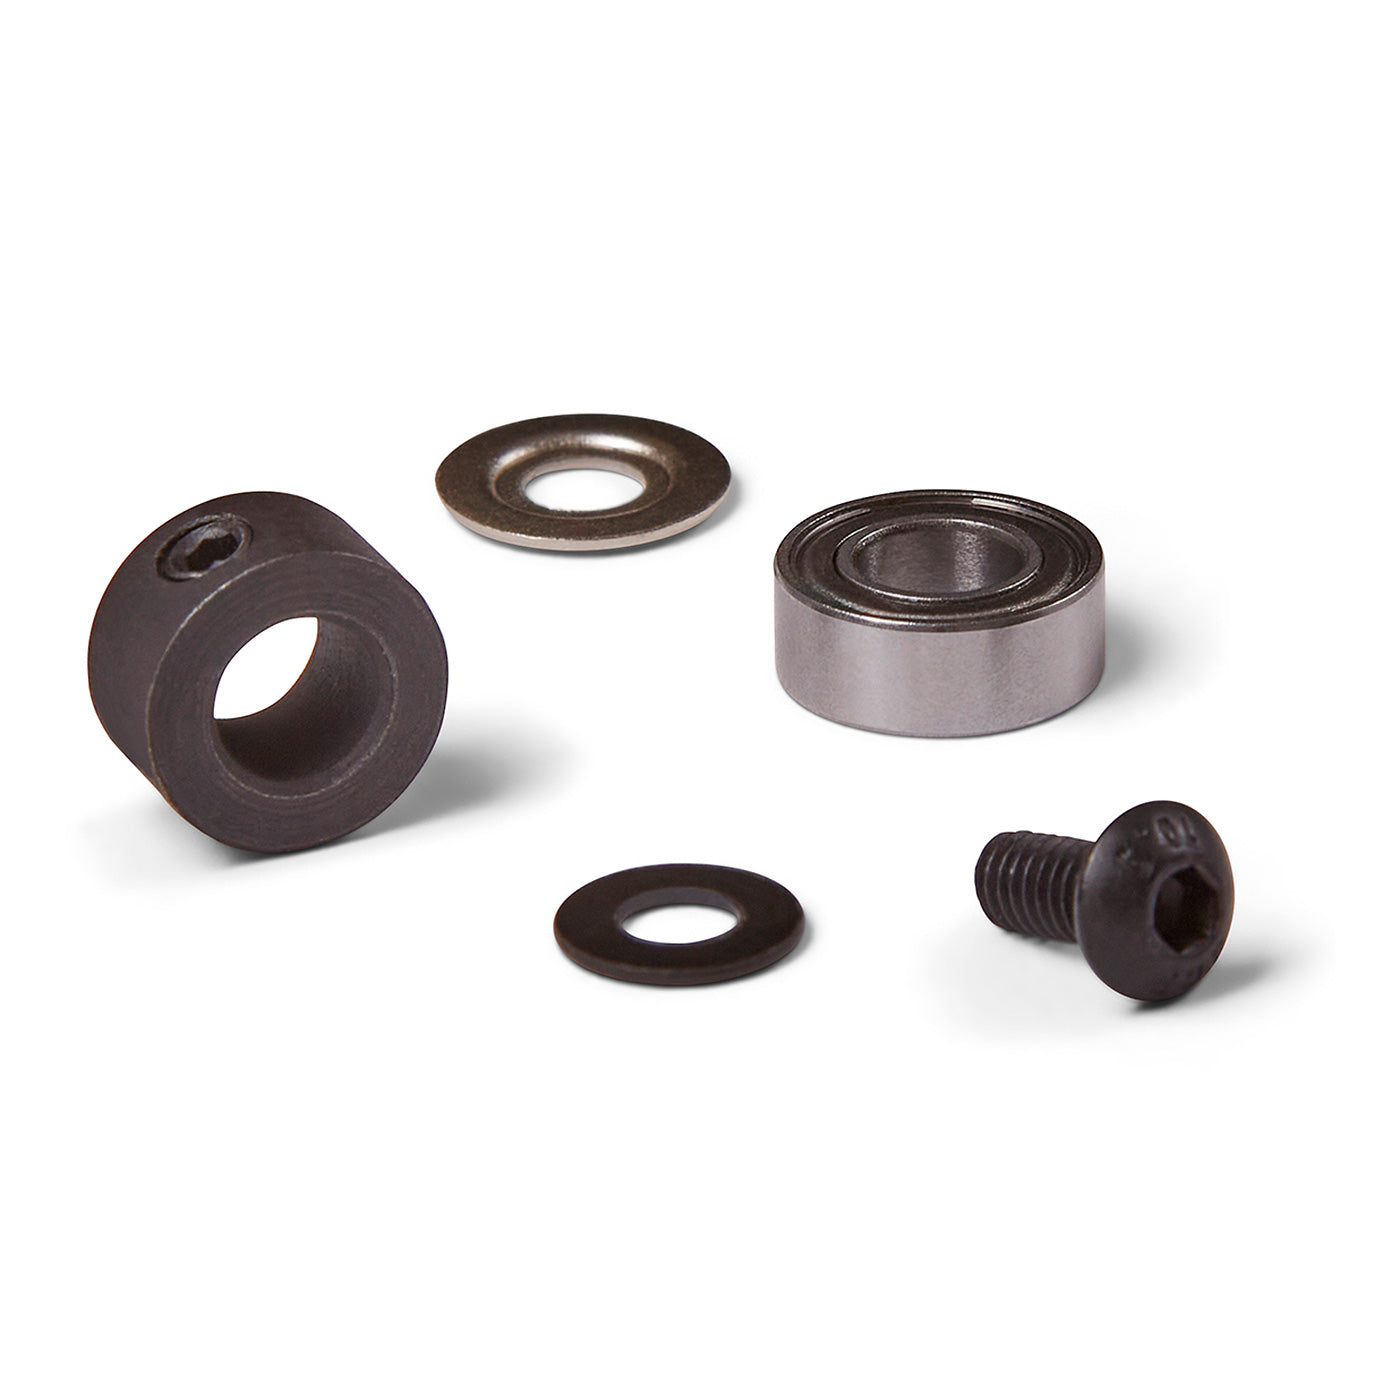 Bearing Kit for R5821, R5822, R5823 and R5824